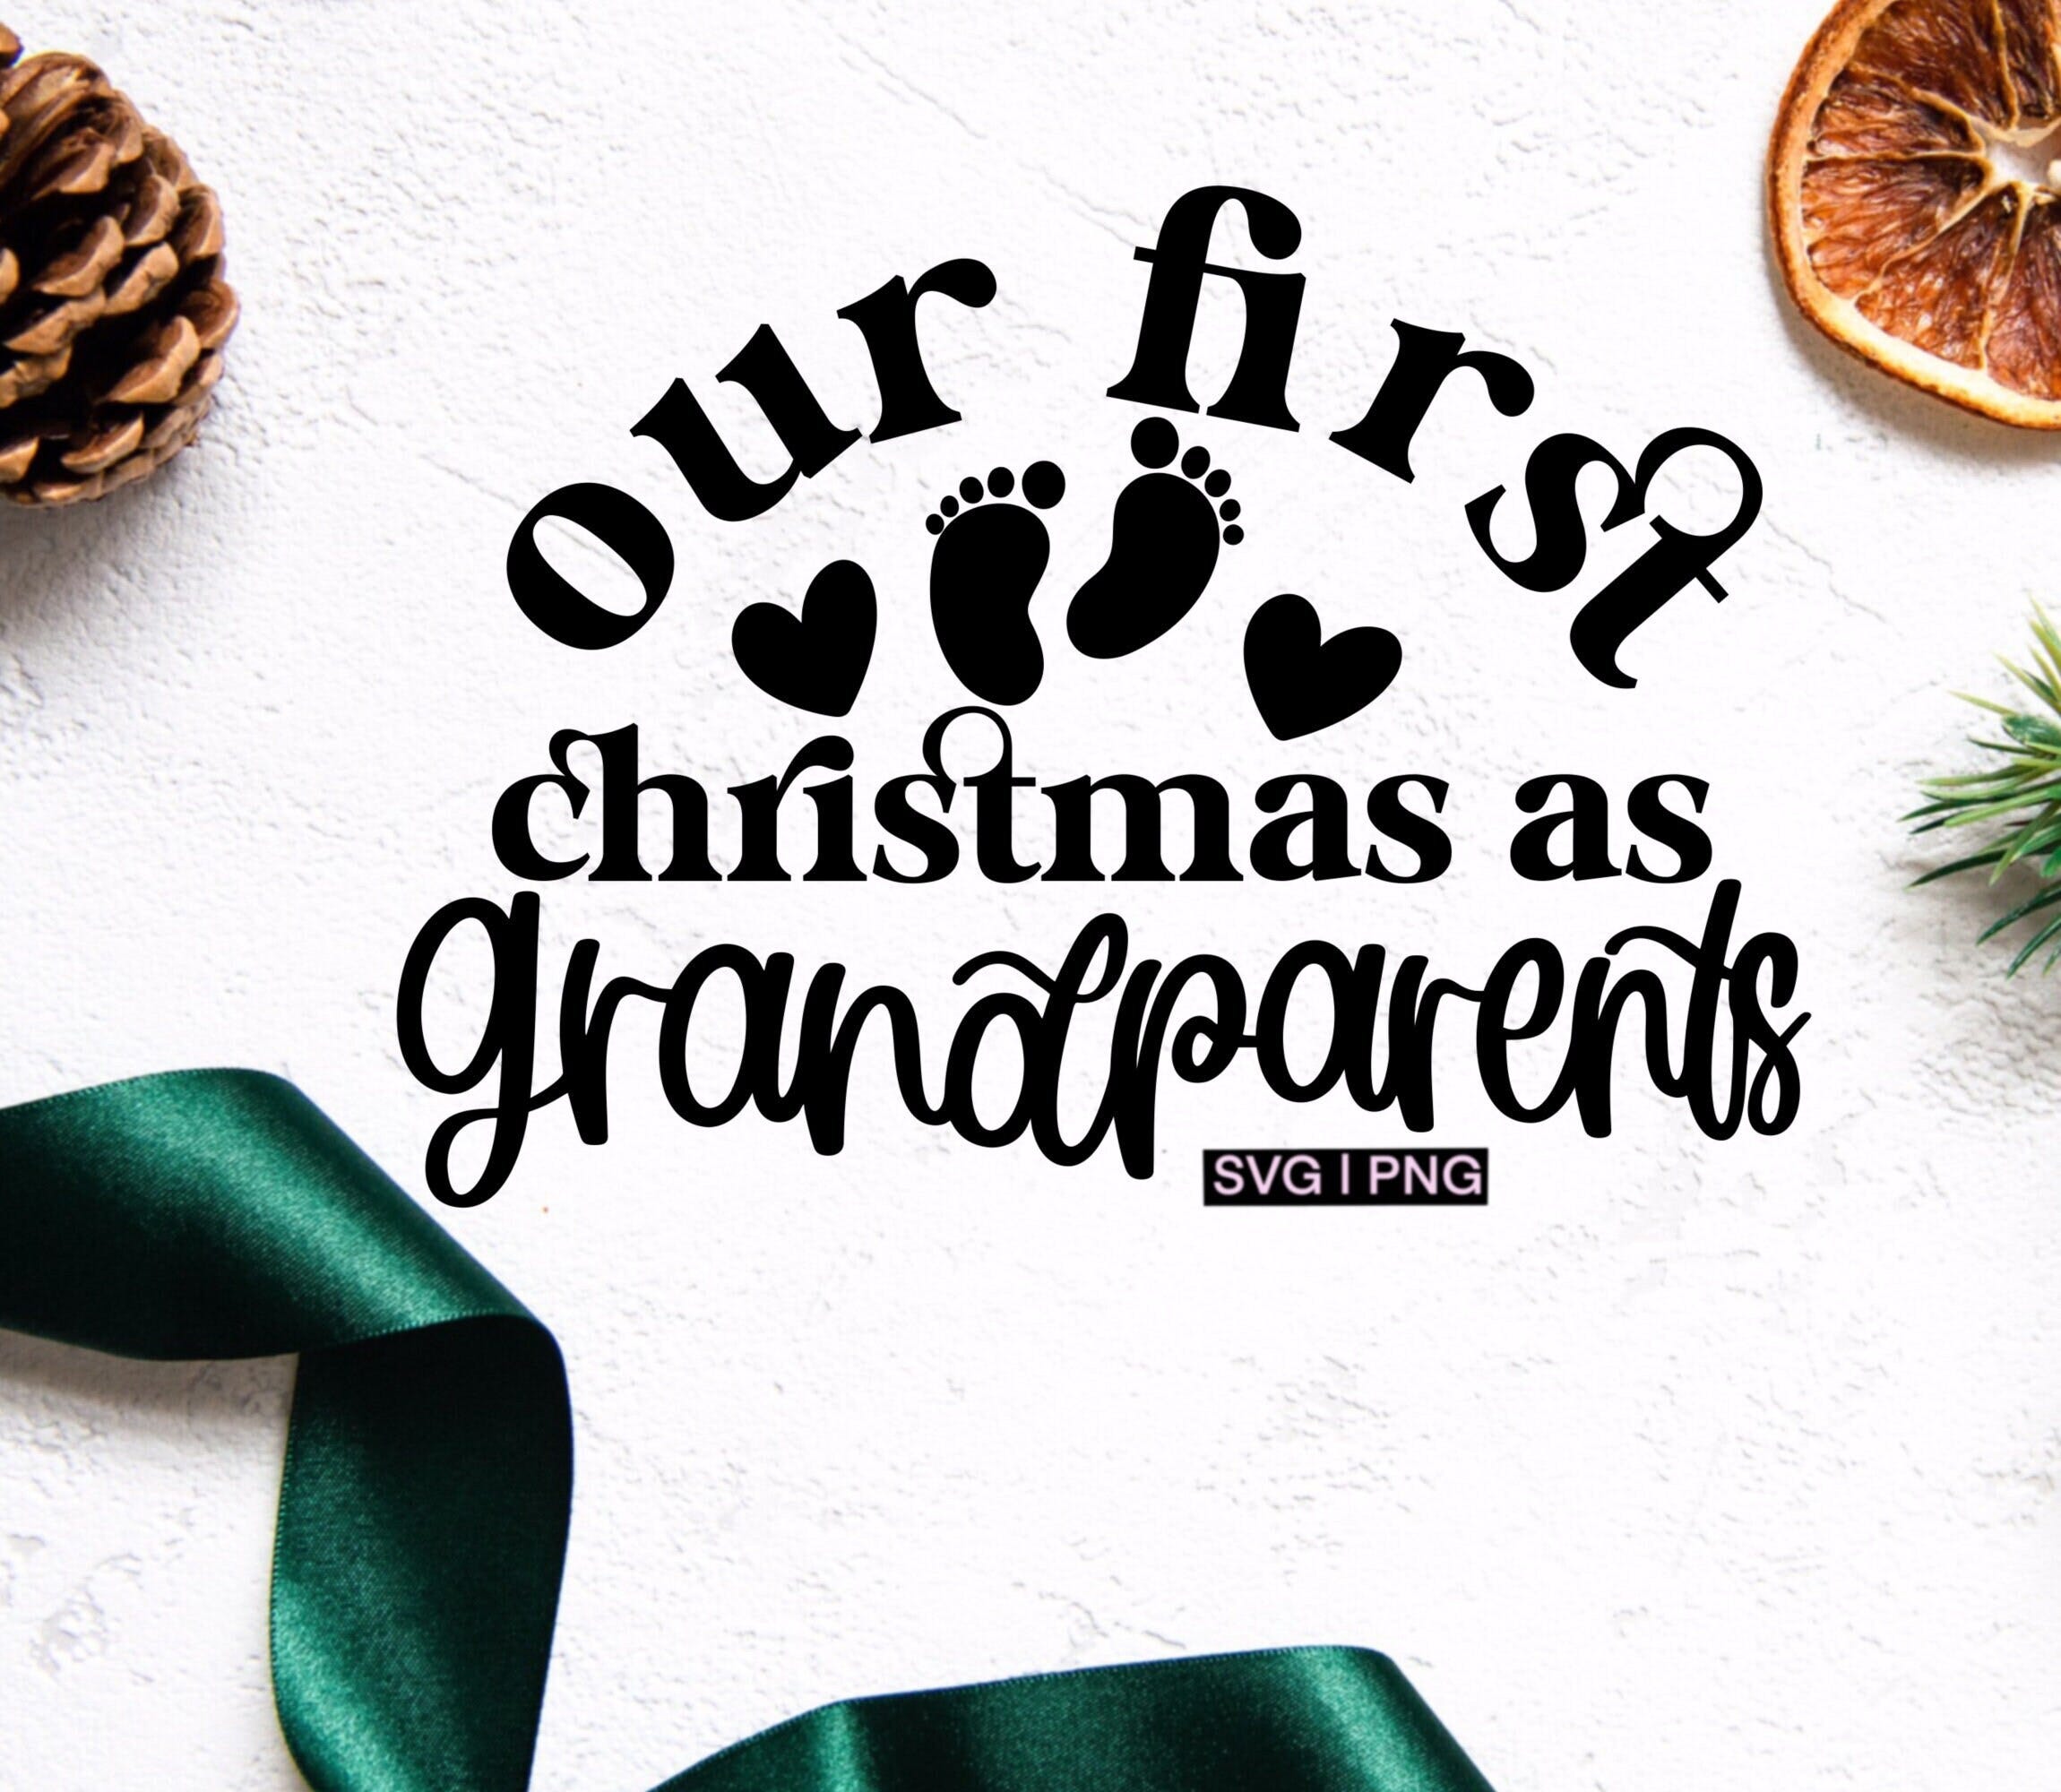 Our first christmas as grandparents svg, first christmas svg, christmas gift for grandparents svg, christmas ornament svg, christmas svg